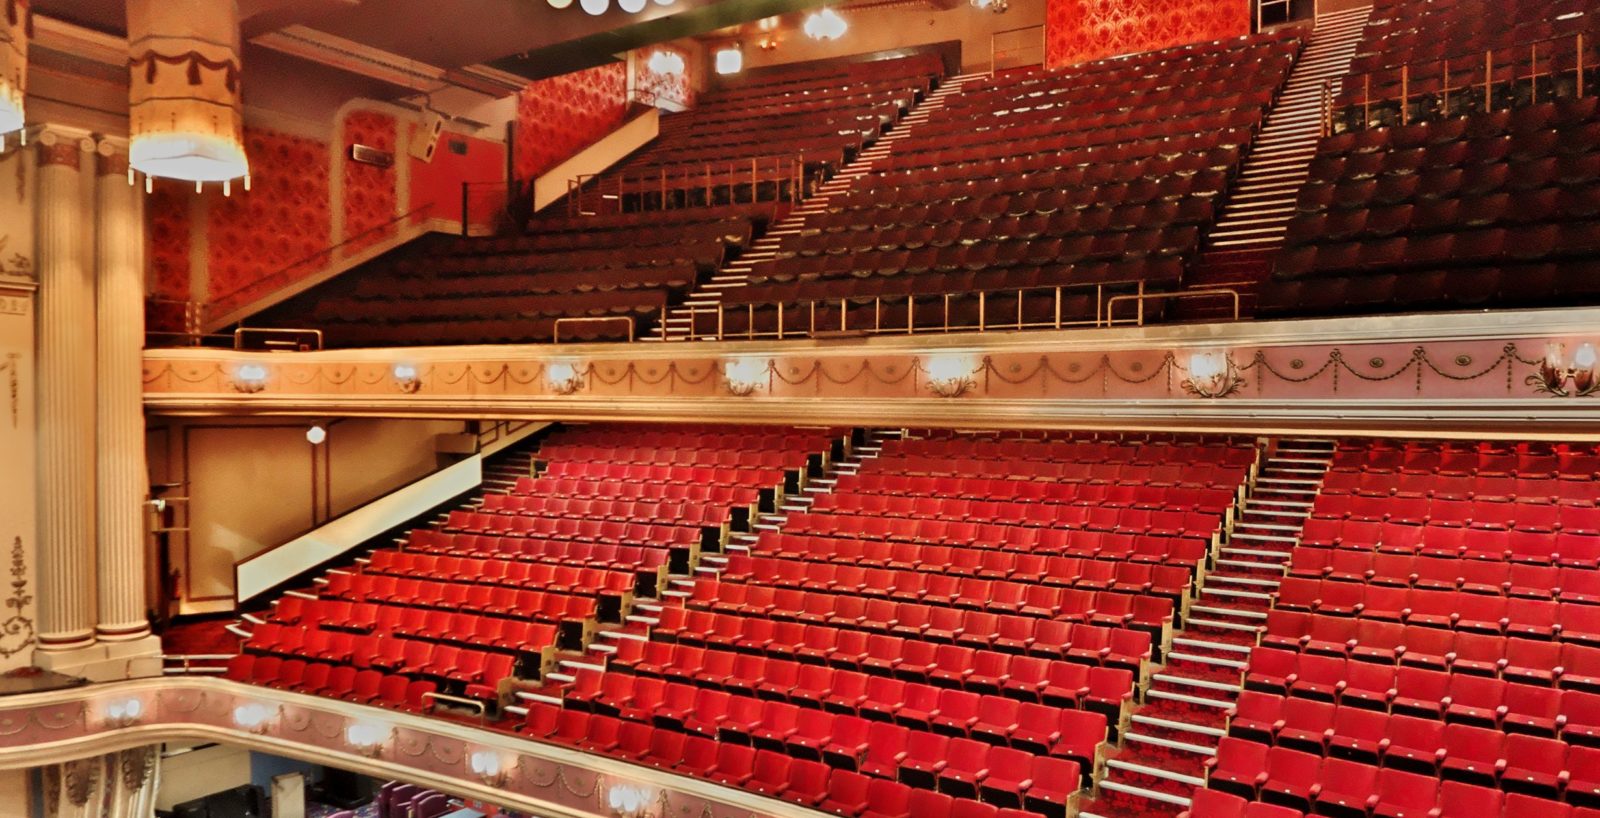 The dress circle and gallery of Streatham Hill Theatre (Photo: Tim Hatcher)